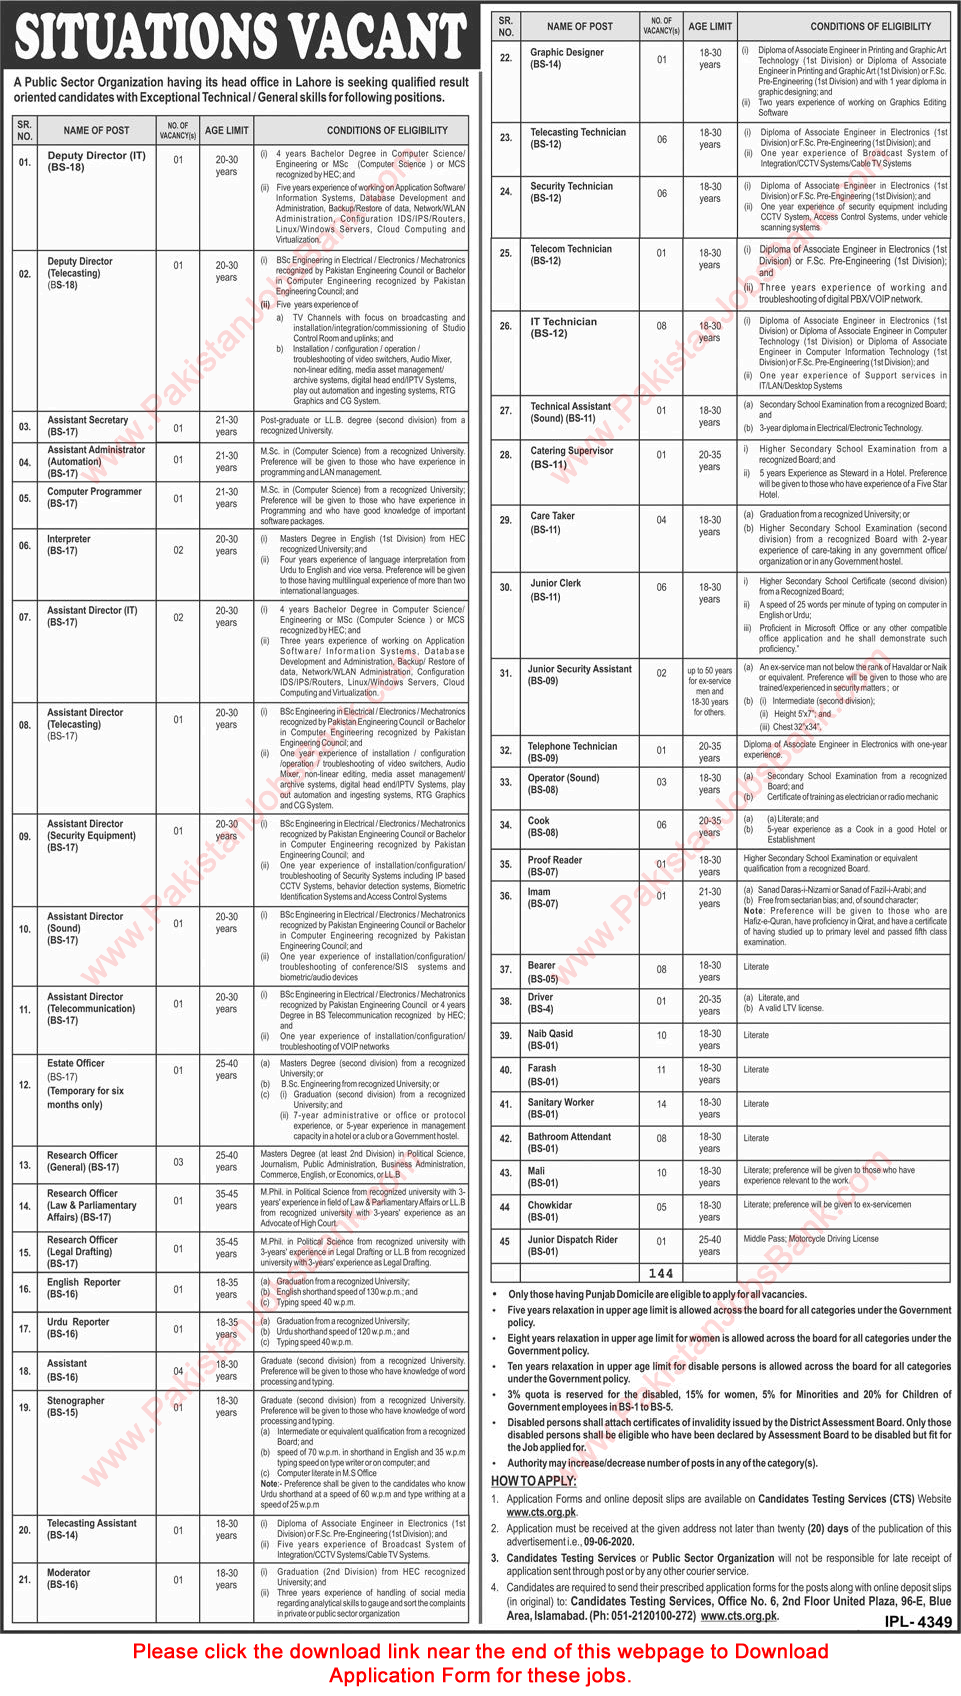 Public Sector Organization Lahore Jobs May 2020 CTS Application Form Clerks, Naib Qasid & Others Latest